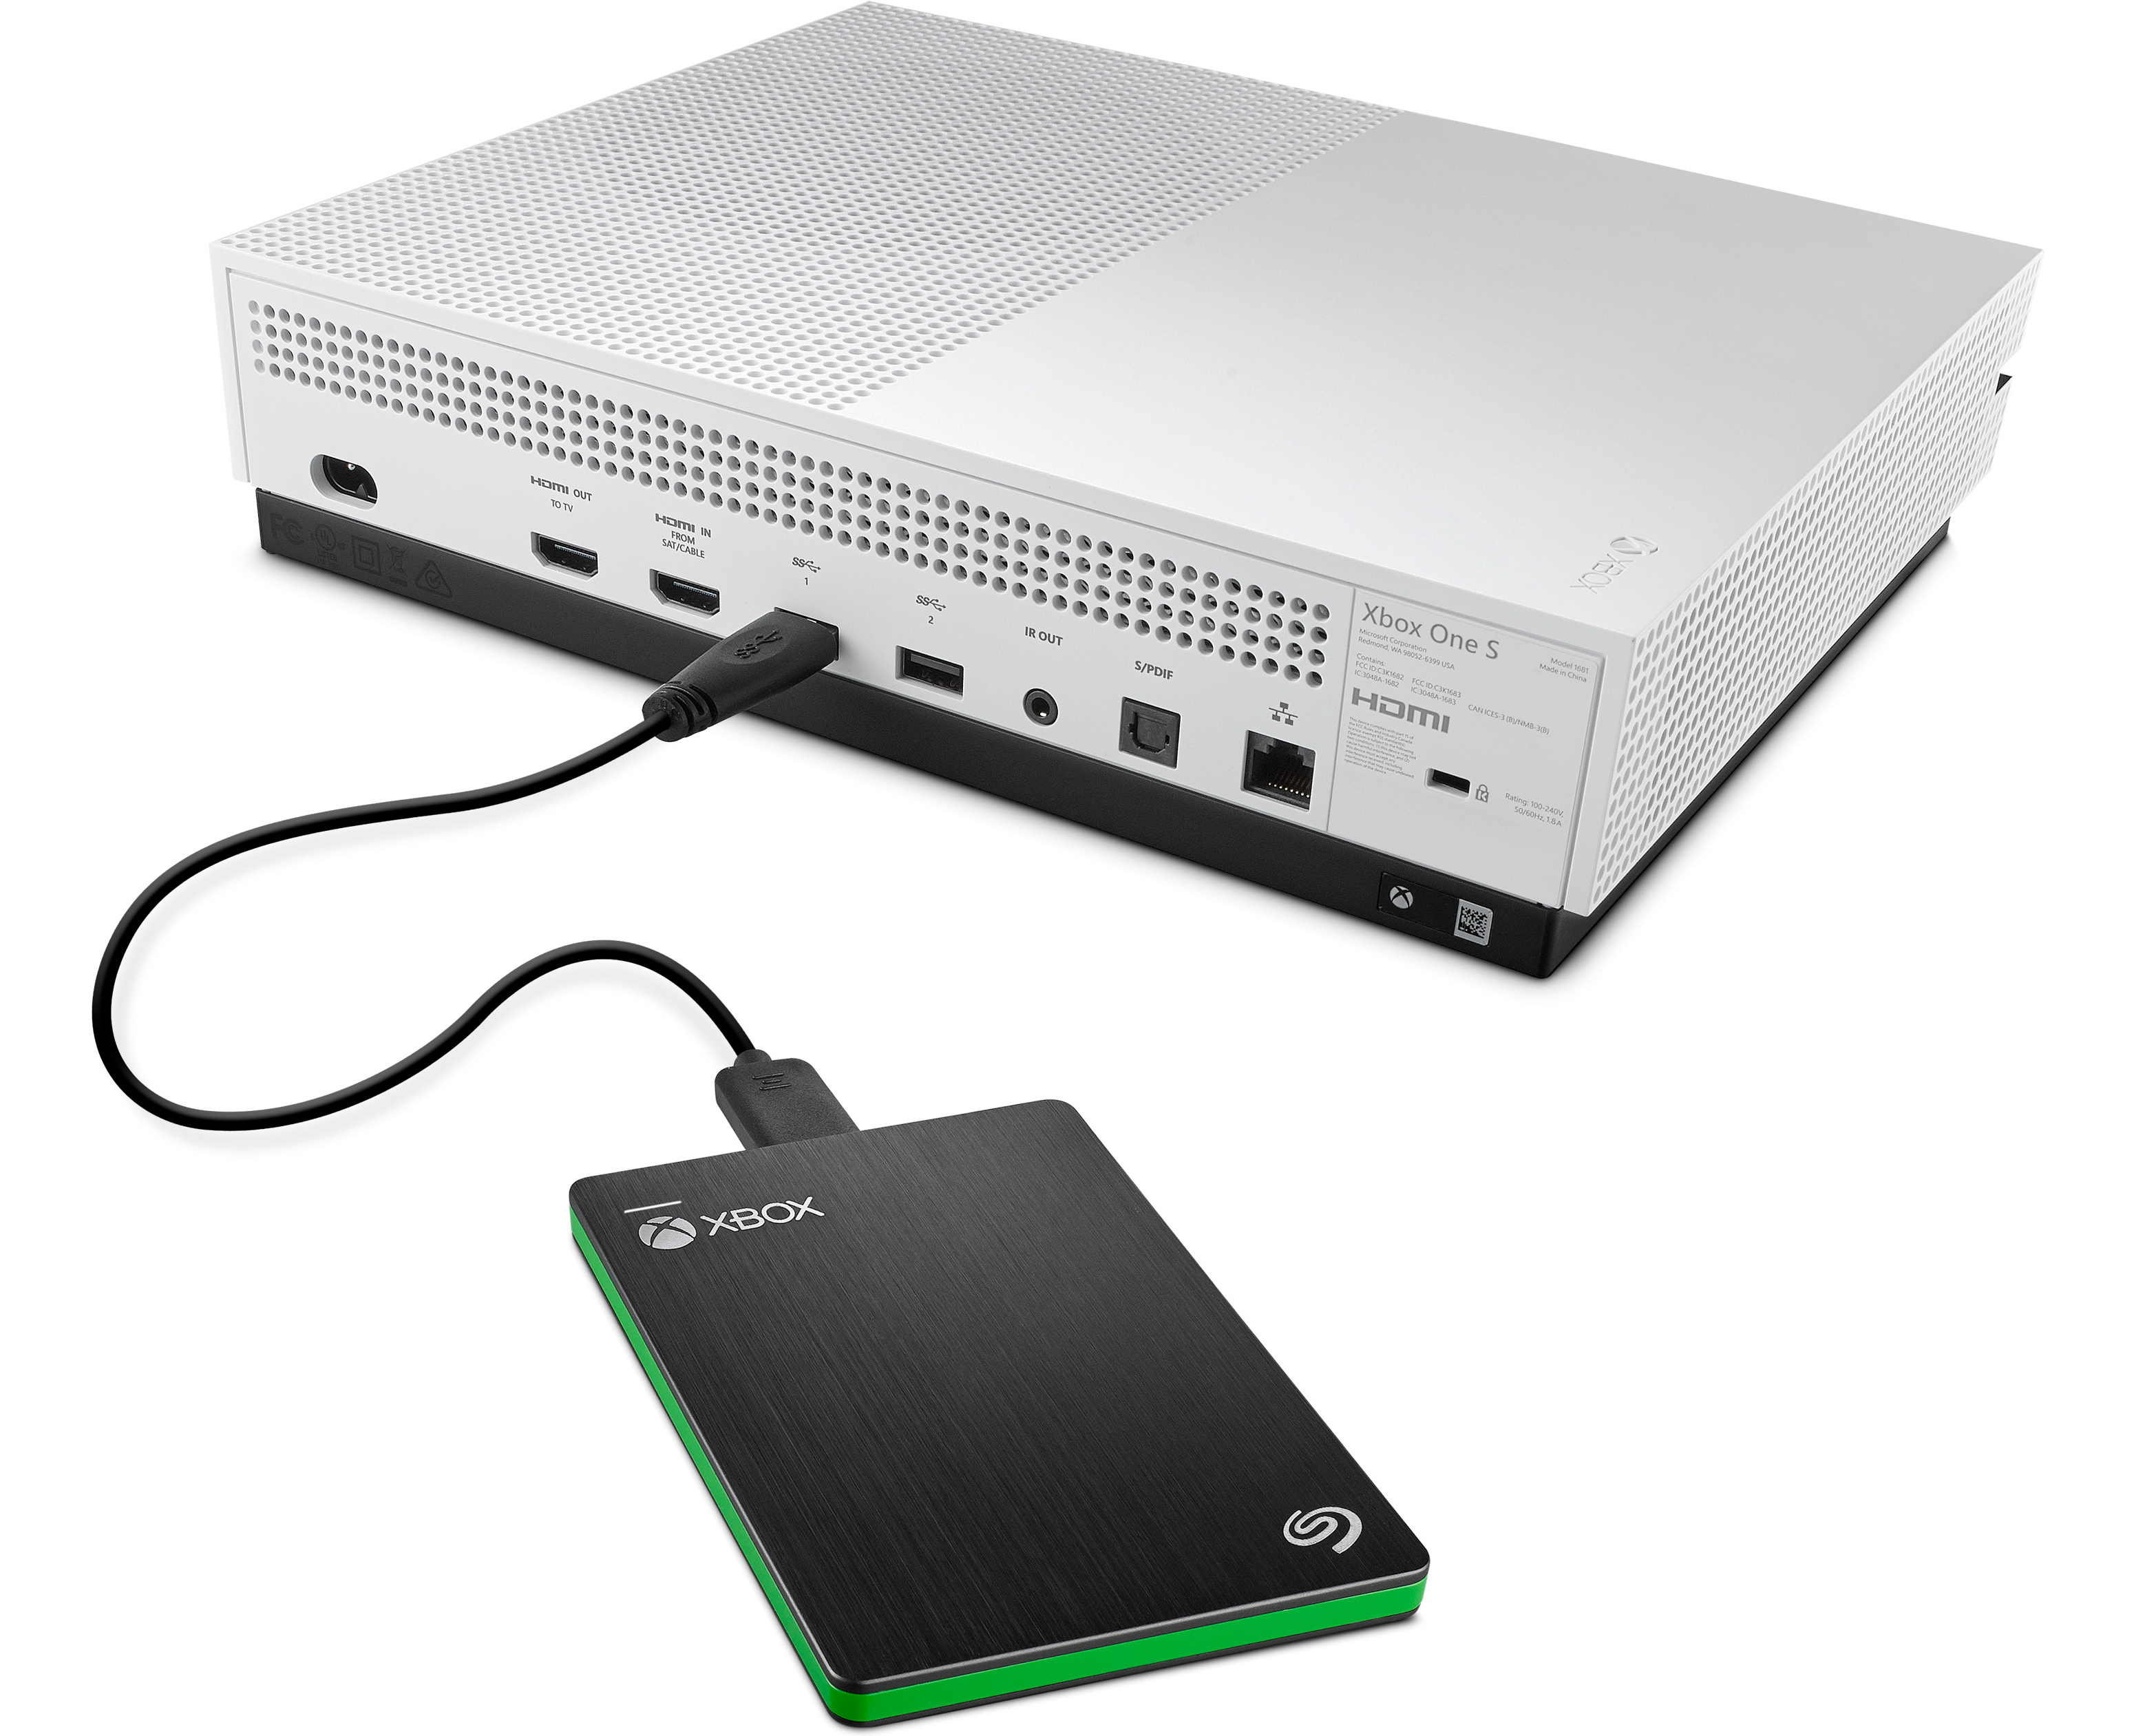 seagate game drive for xbox stores